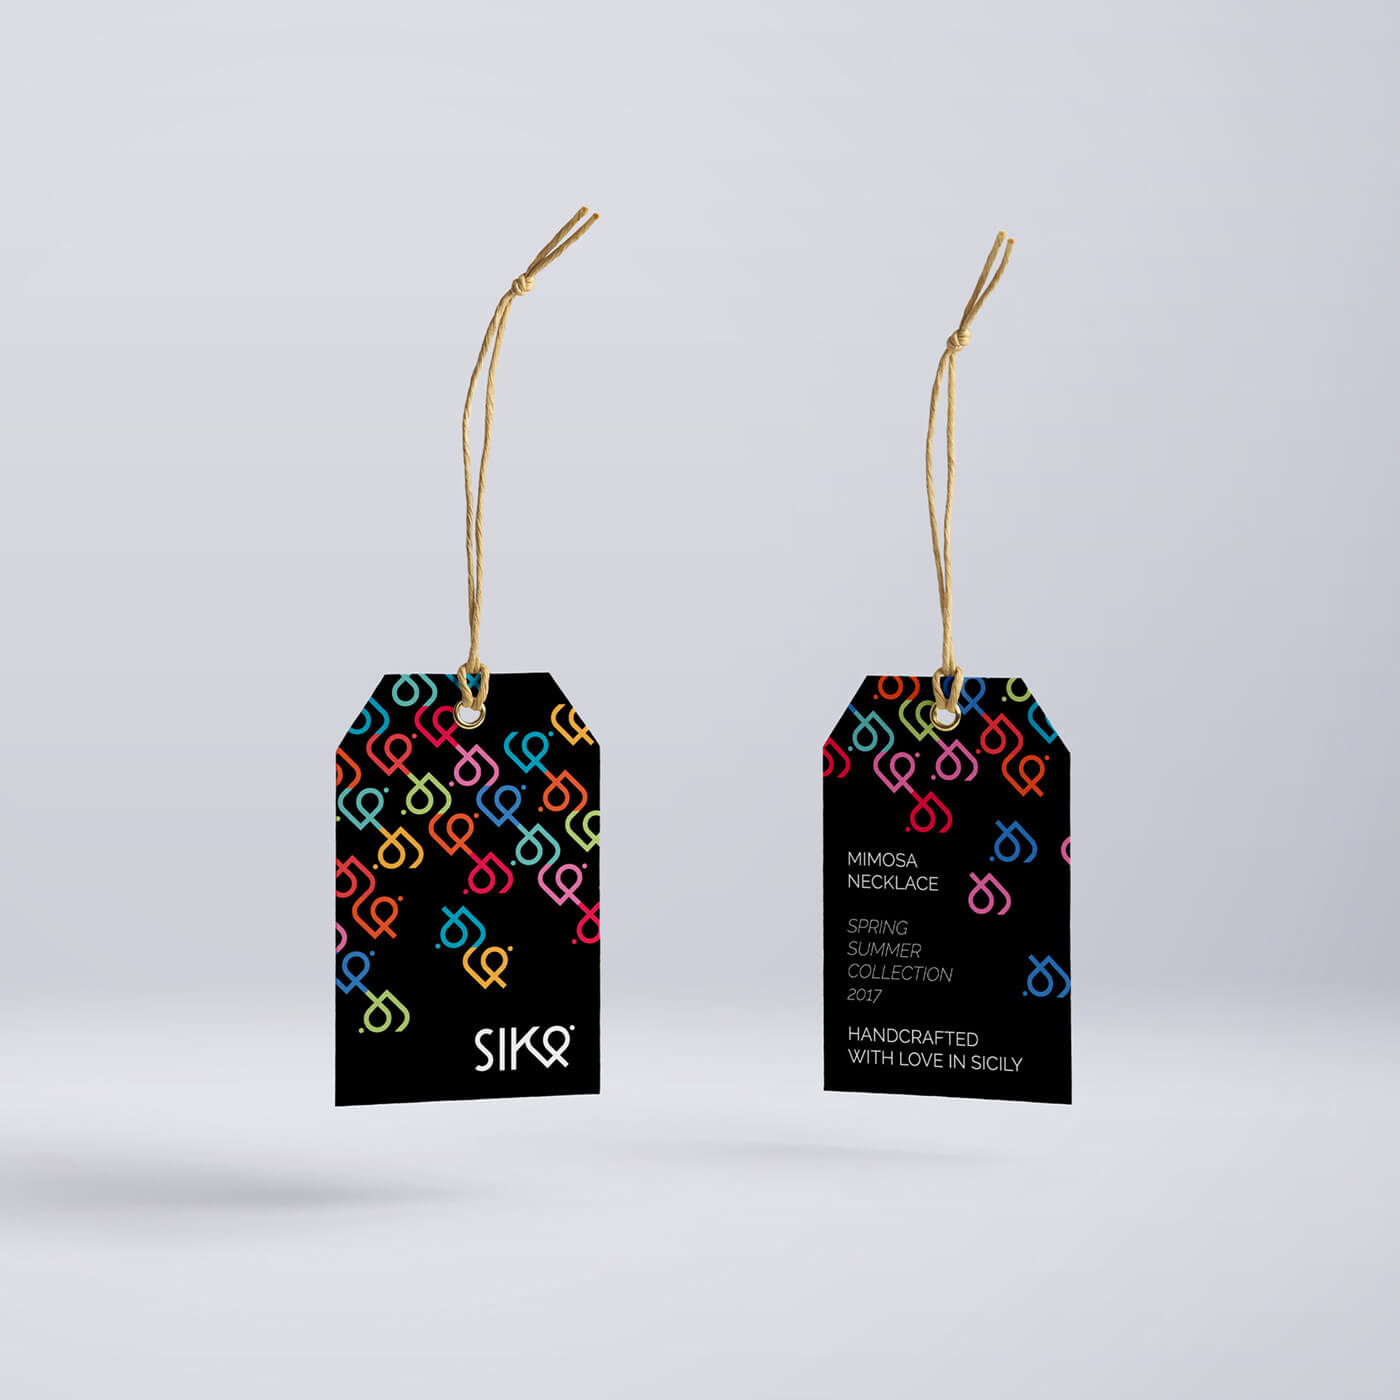 Brand design for fashion retail company, Sike, Sicily, Italy